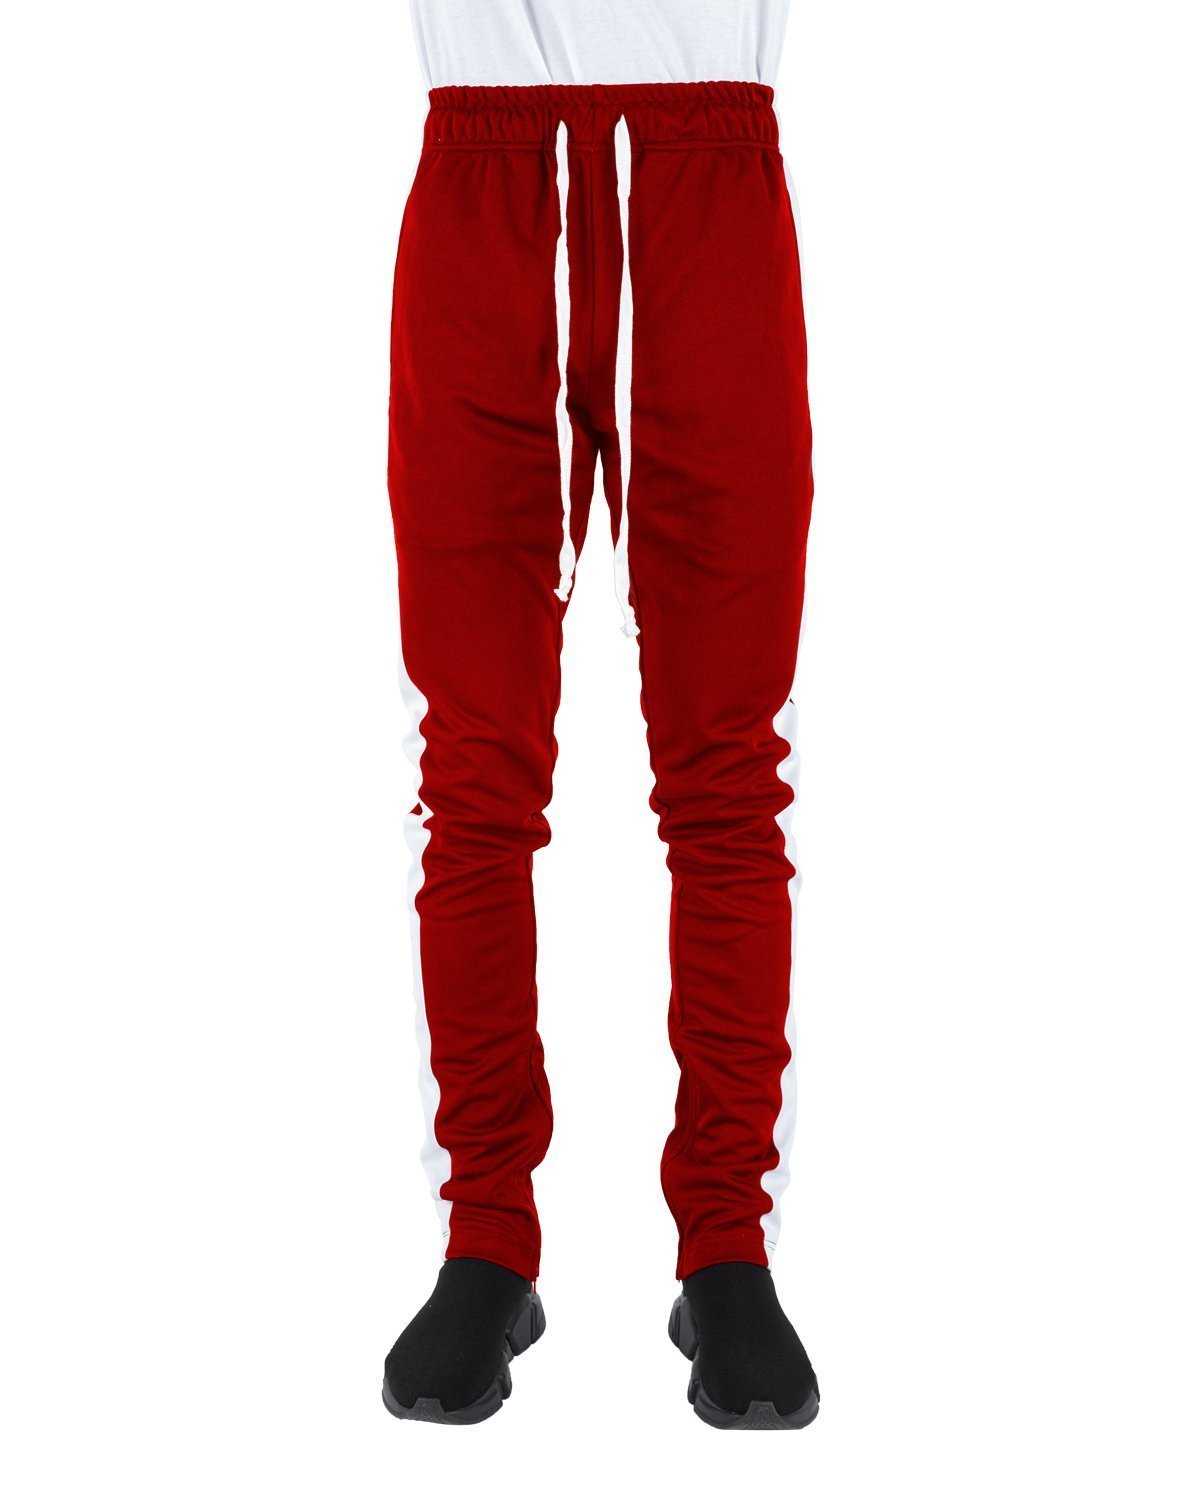 Track Pants XL / Red and White